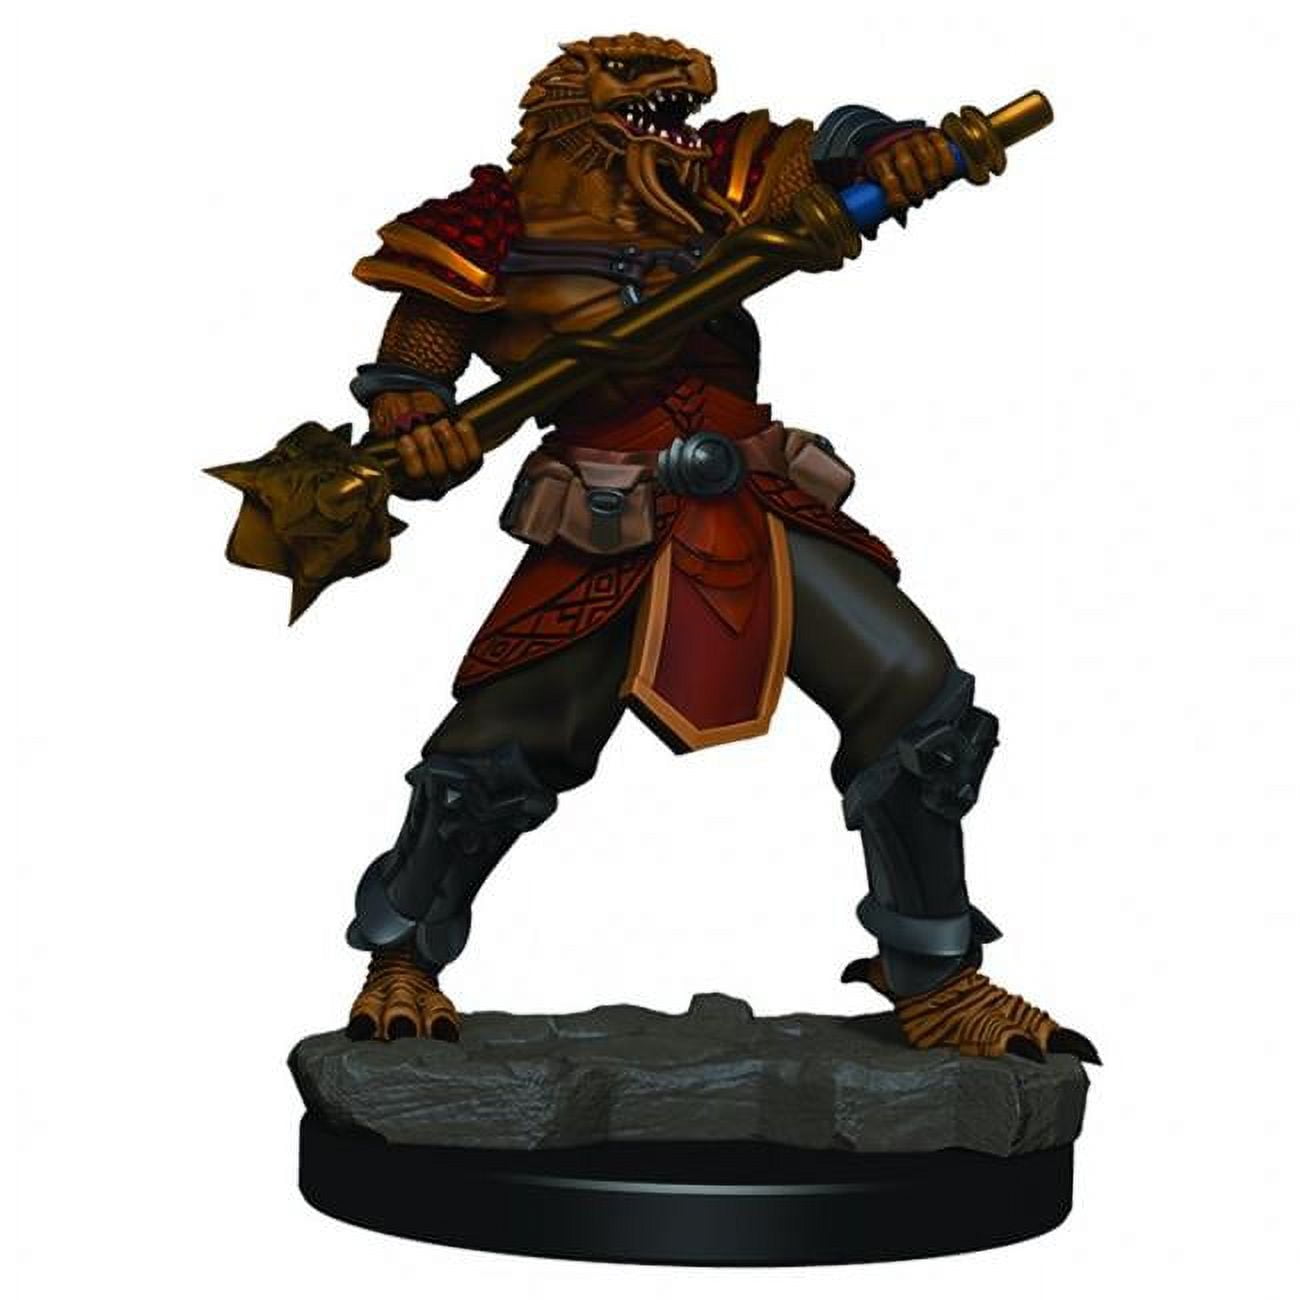 Picture of WizKids WZK93015 Dungeons & Dragons Icons of the Realms Premium Male Dragonborn Fighter Miniature